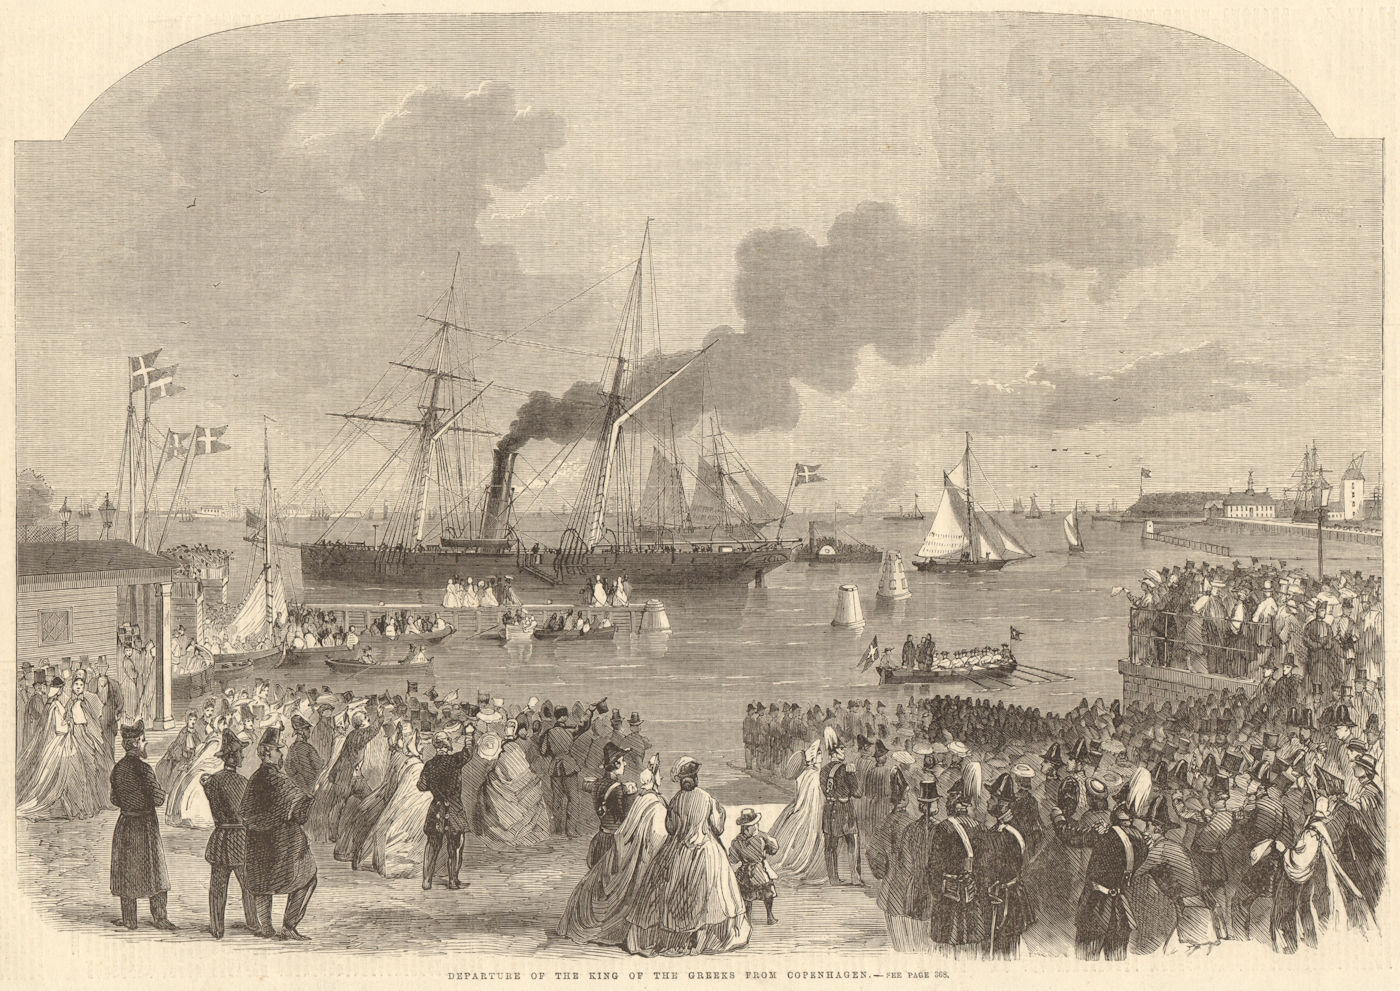 Associate Product Departure of the King of the Greeks from Copenhagen. Denmark. Ships 1863